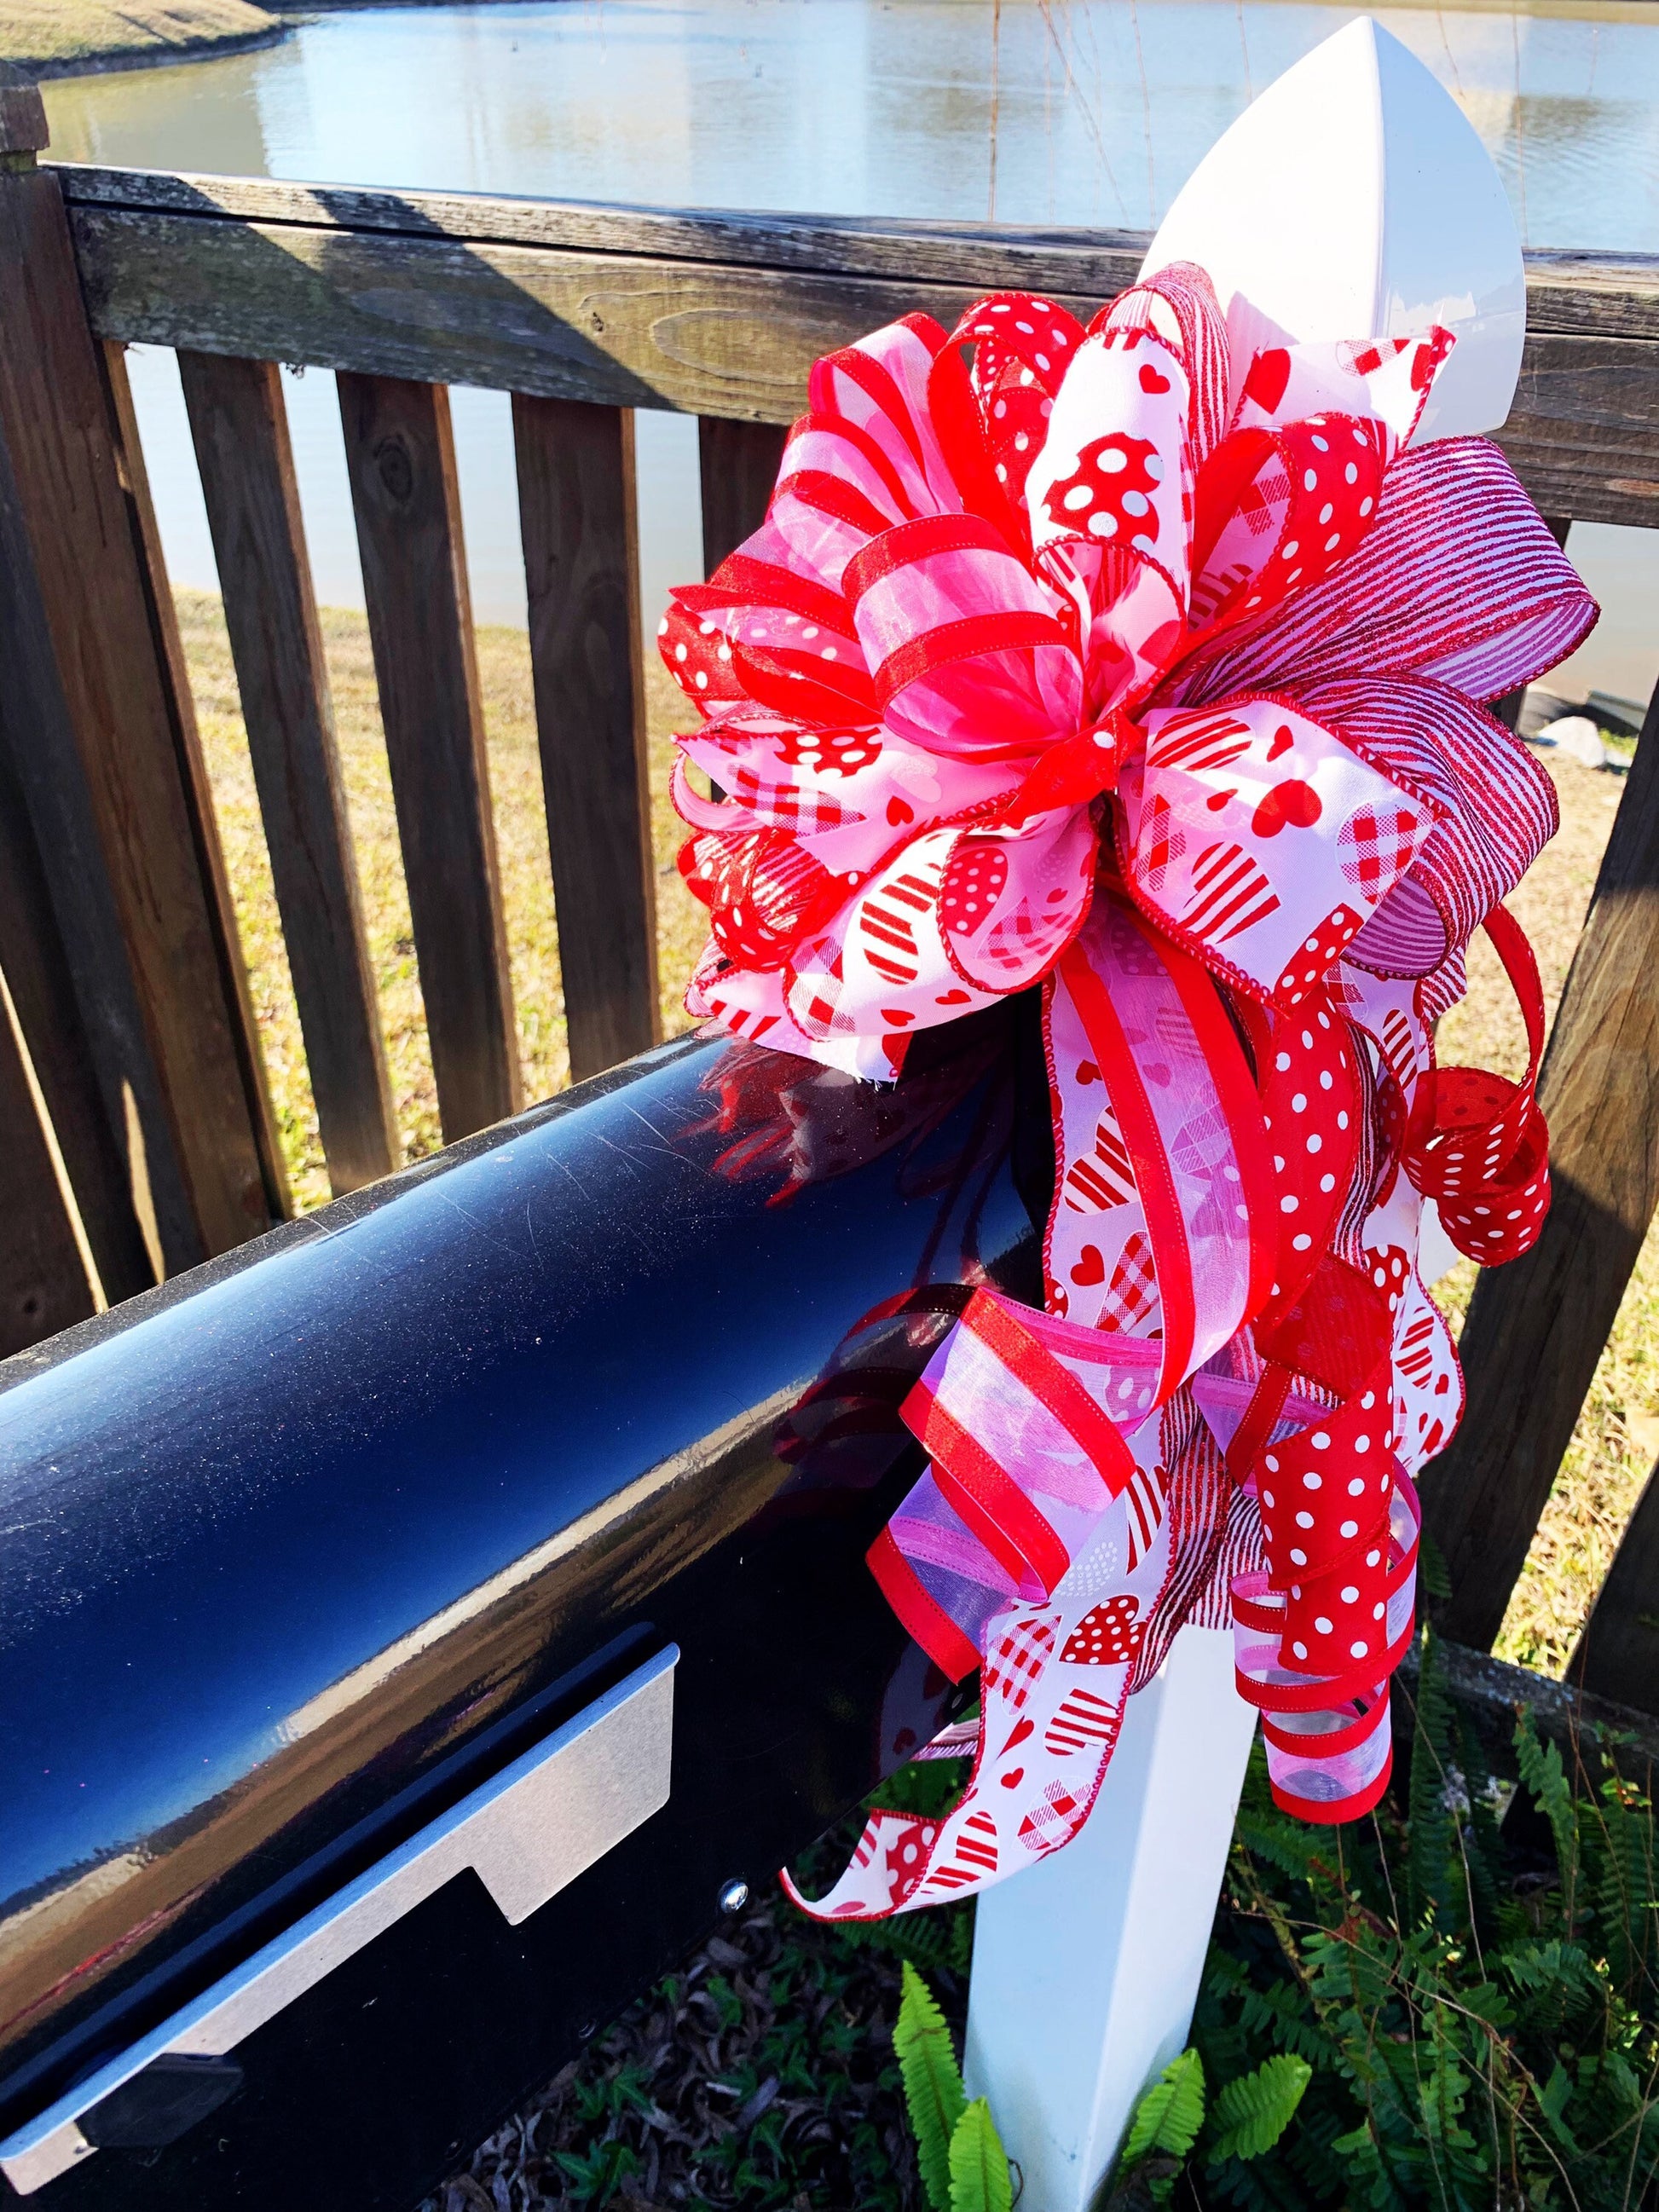 Valentine Heart Wired Ribbon Bow